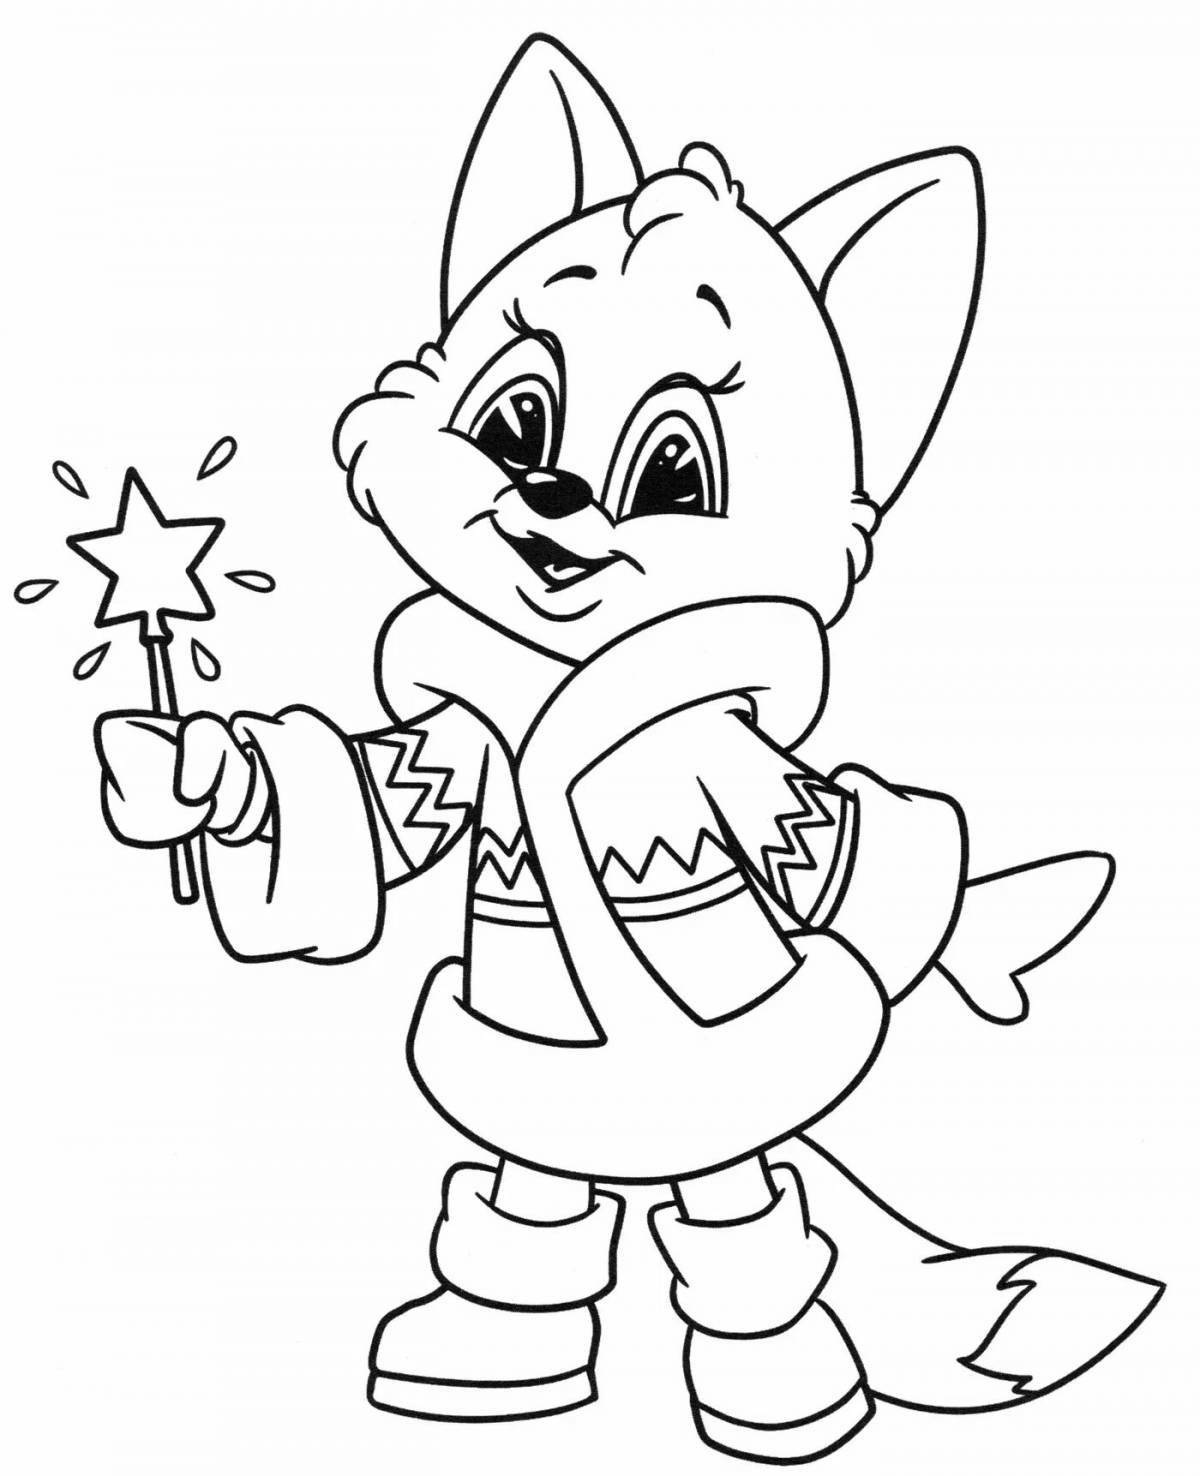 Happy coloring page fox for girls